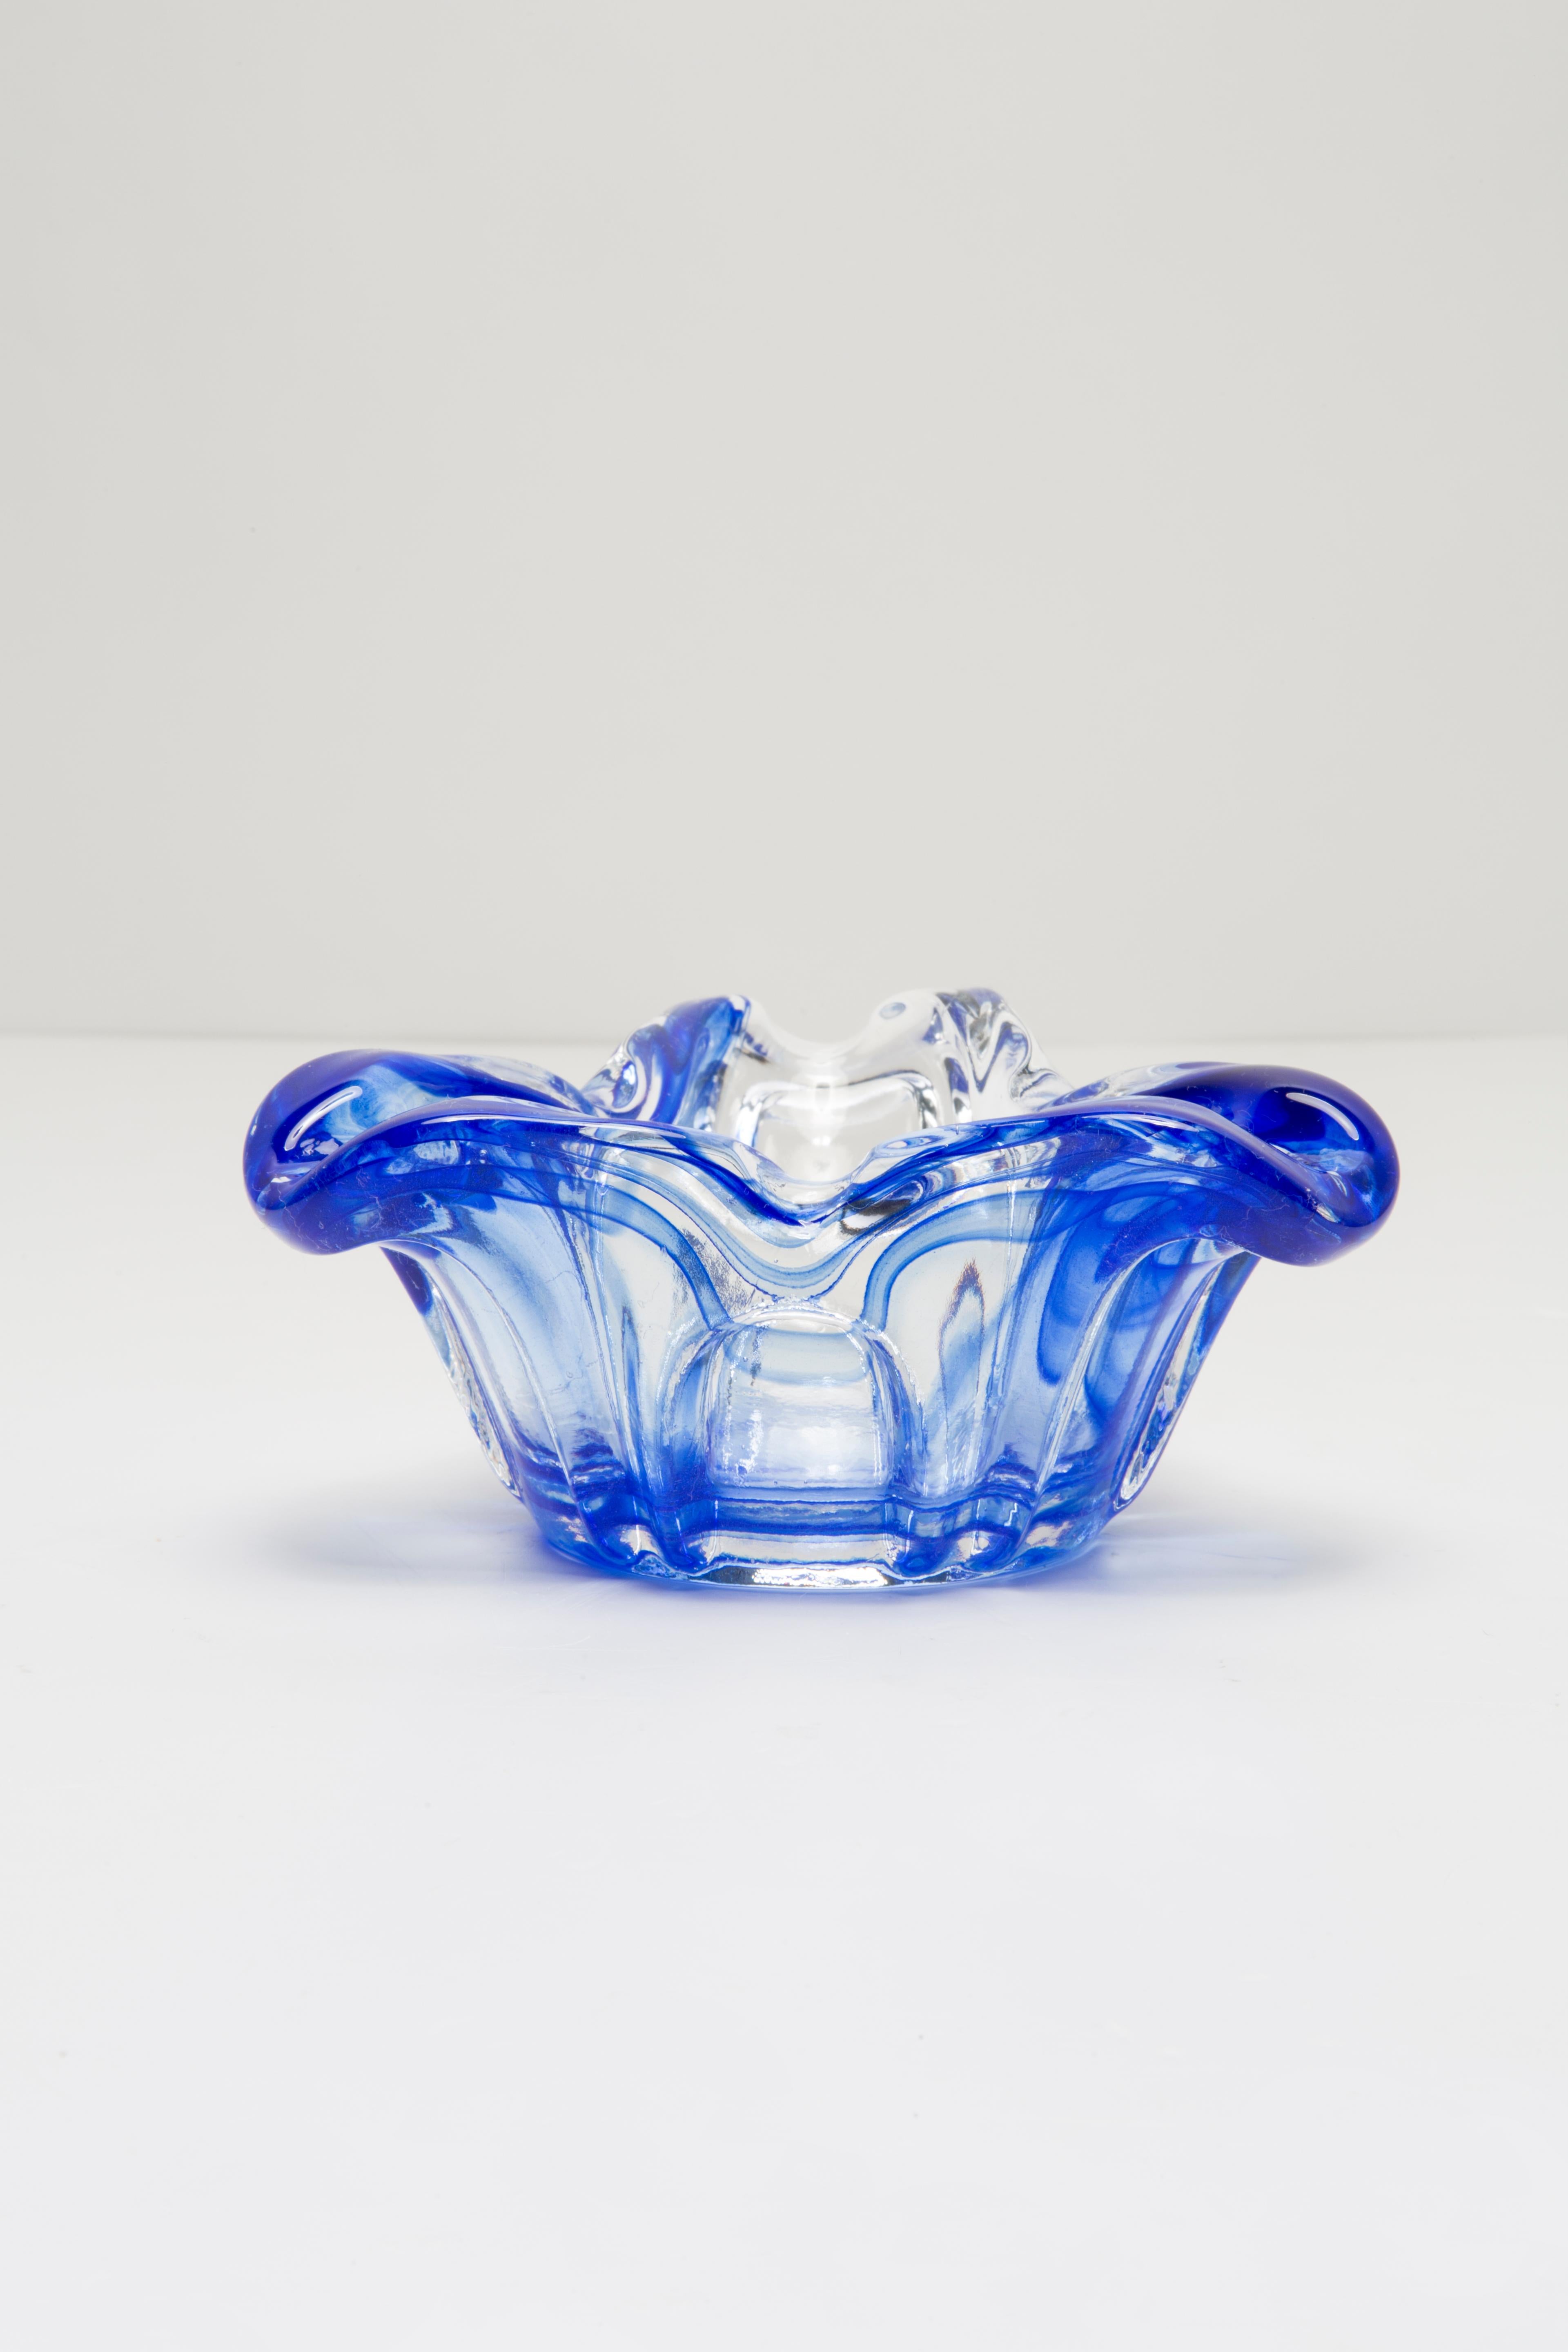 This original vintage glass element was designed and produced in the 1970s in Lombardia, Italy. It is made in Sommerso Technique and has a fantastic faceted form. The vibrant color makes this items highly decorative. This item is a high quality